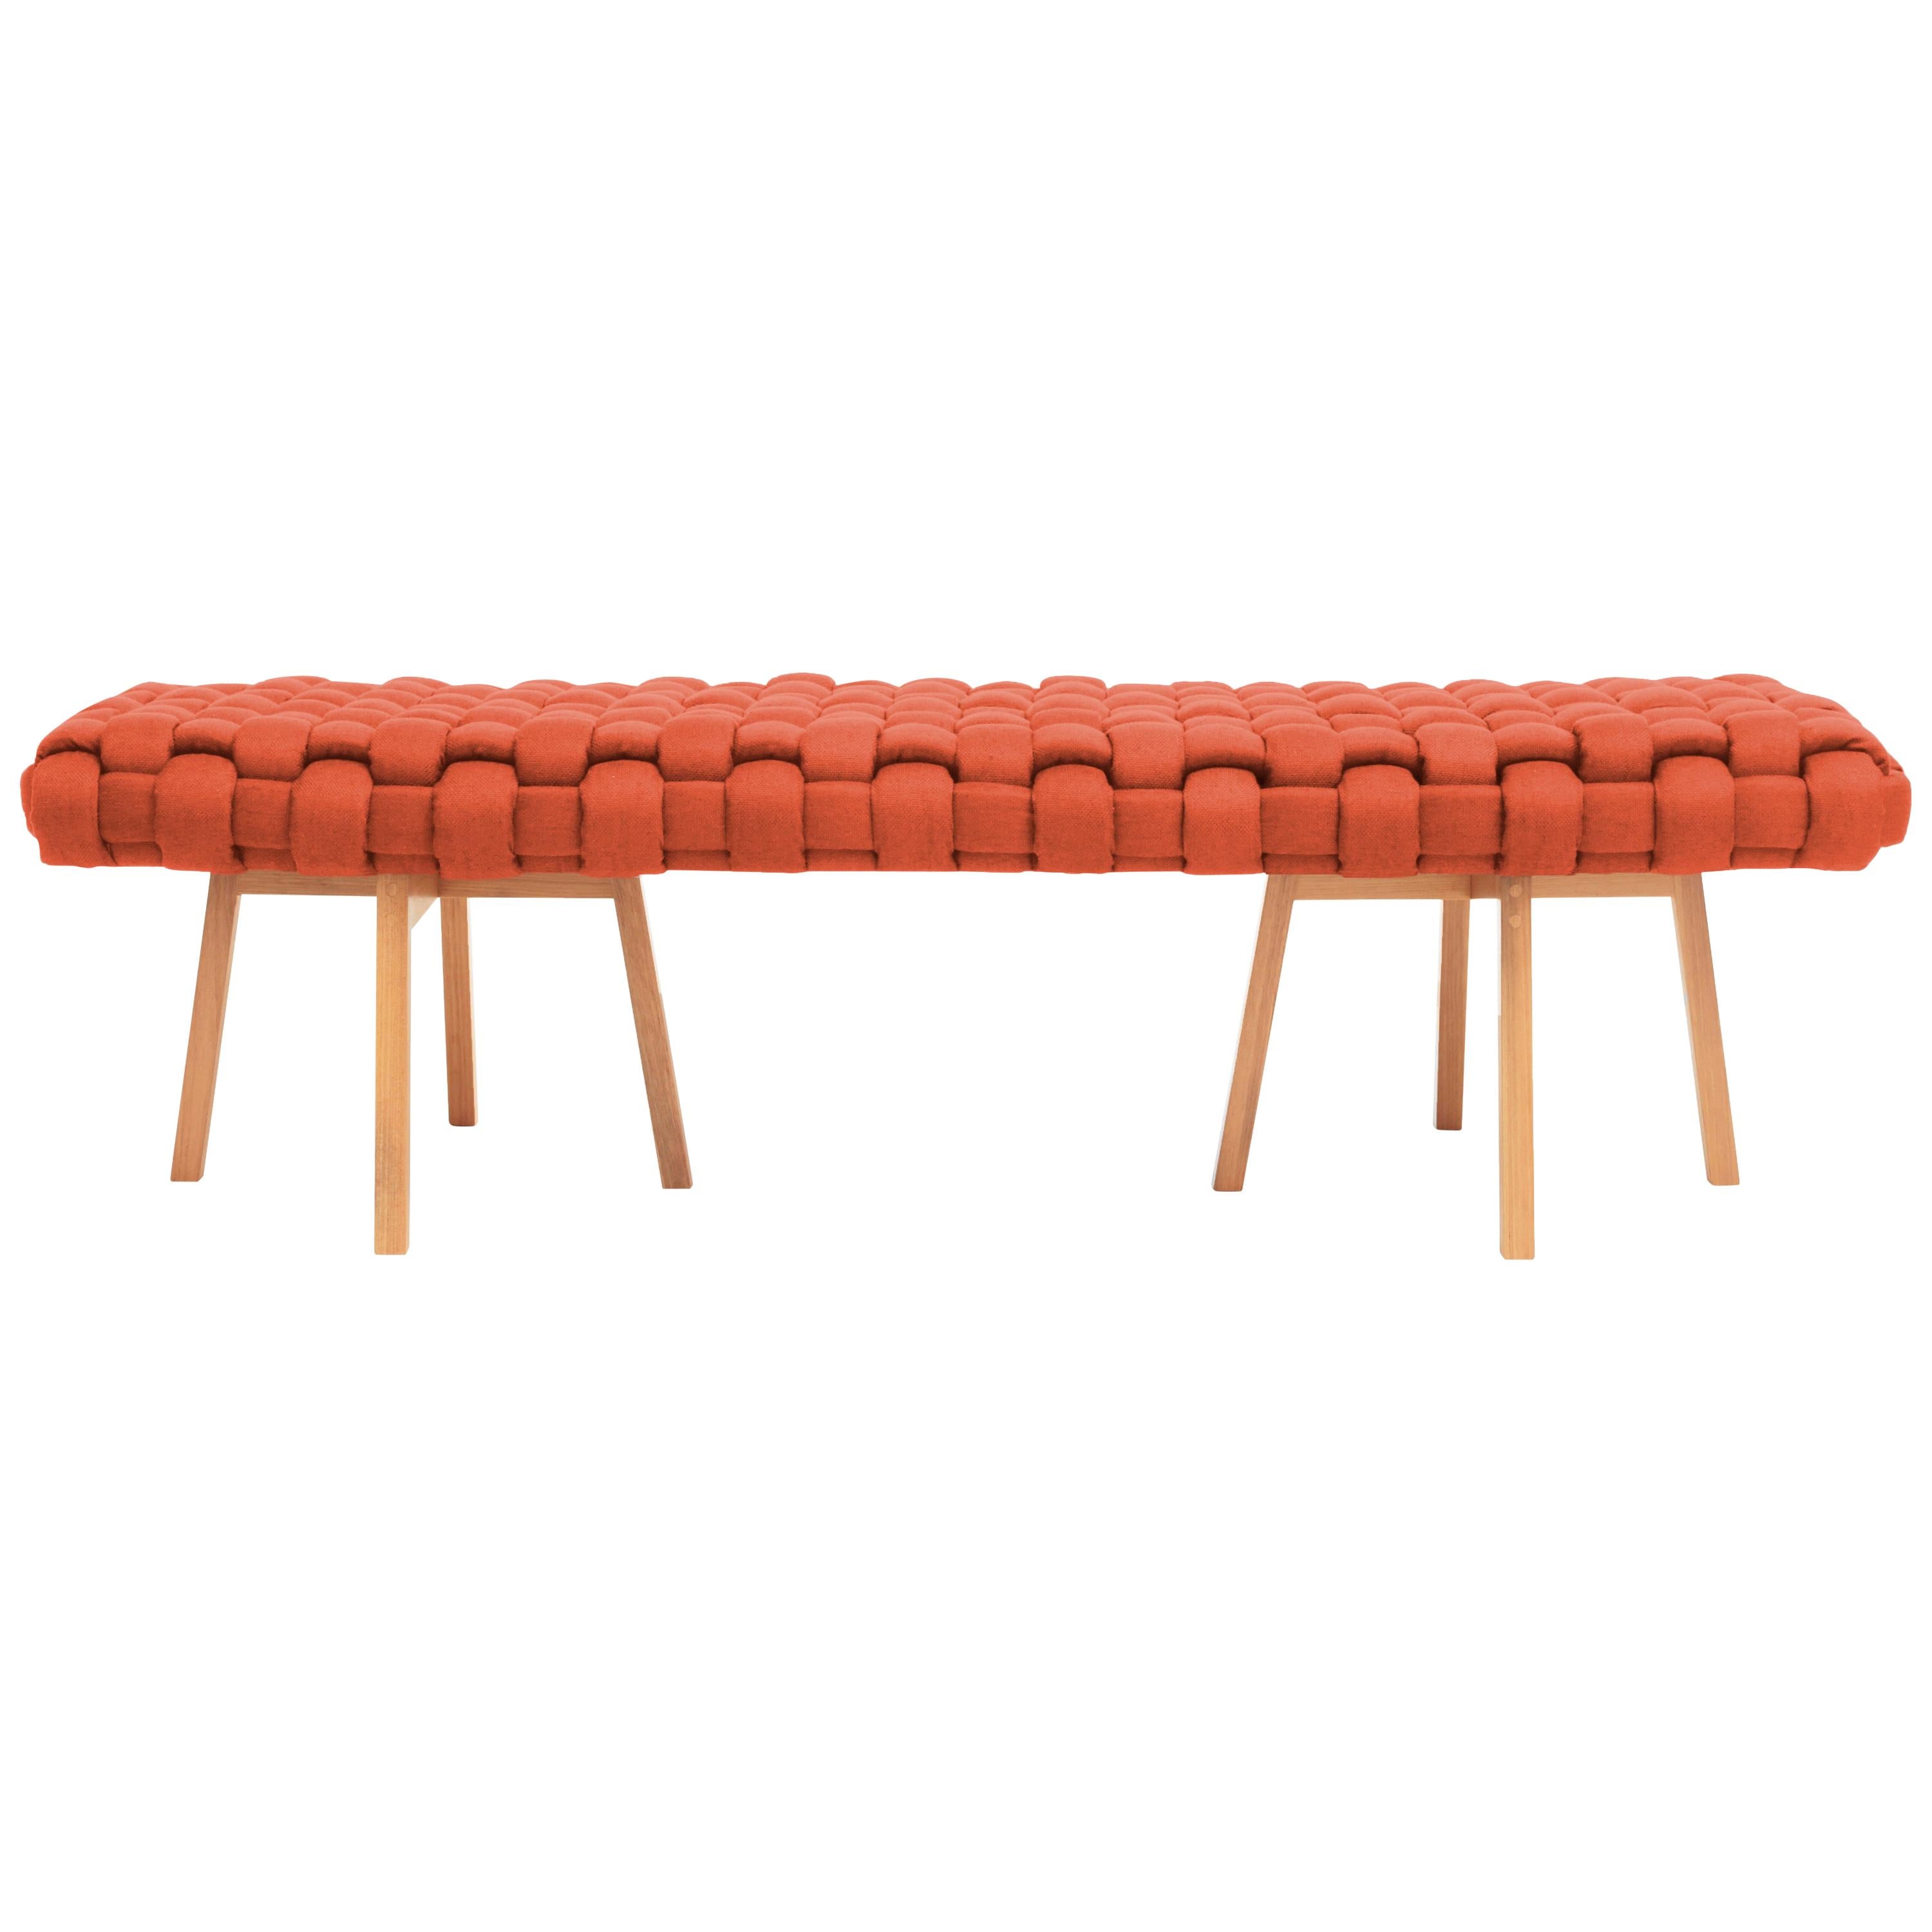 Contemporary Wood Bench, Handwoven Upholstery, the "Trama", Orange For Sale